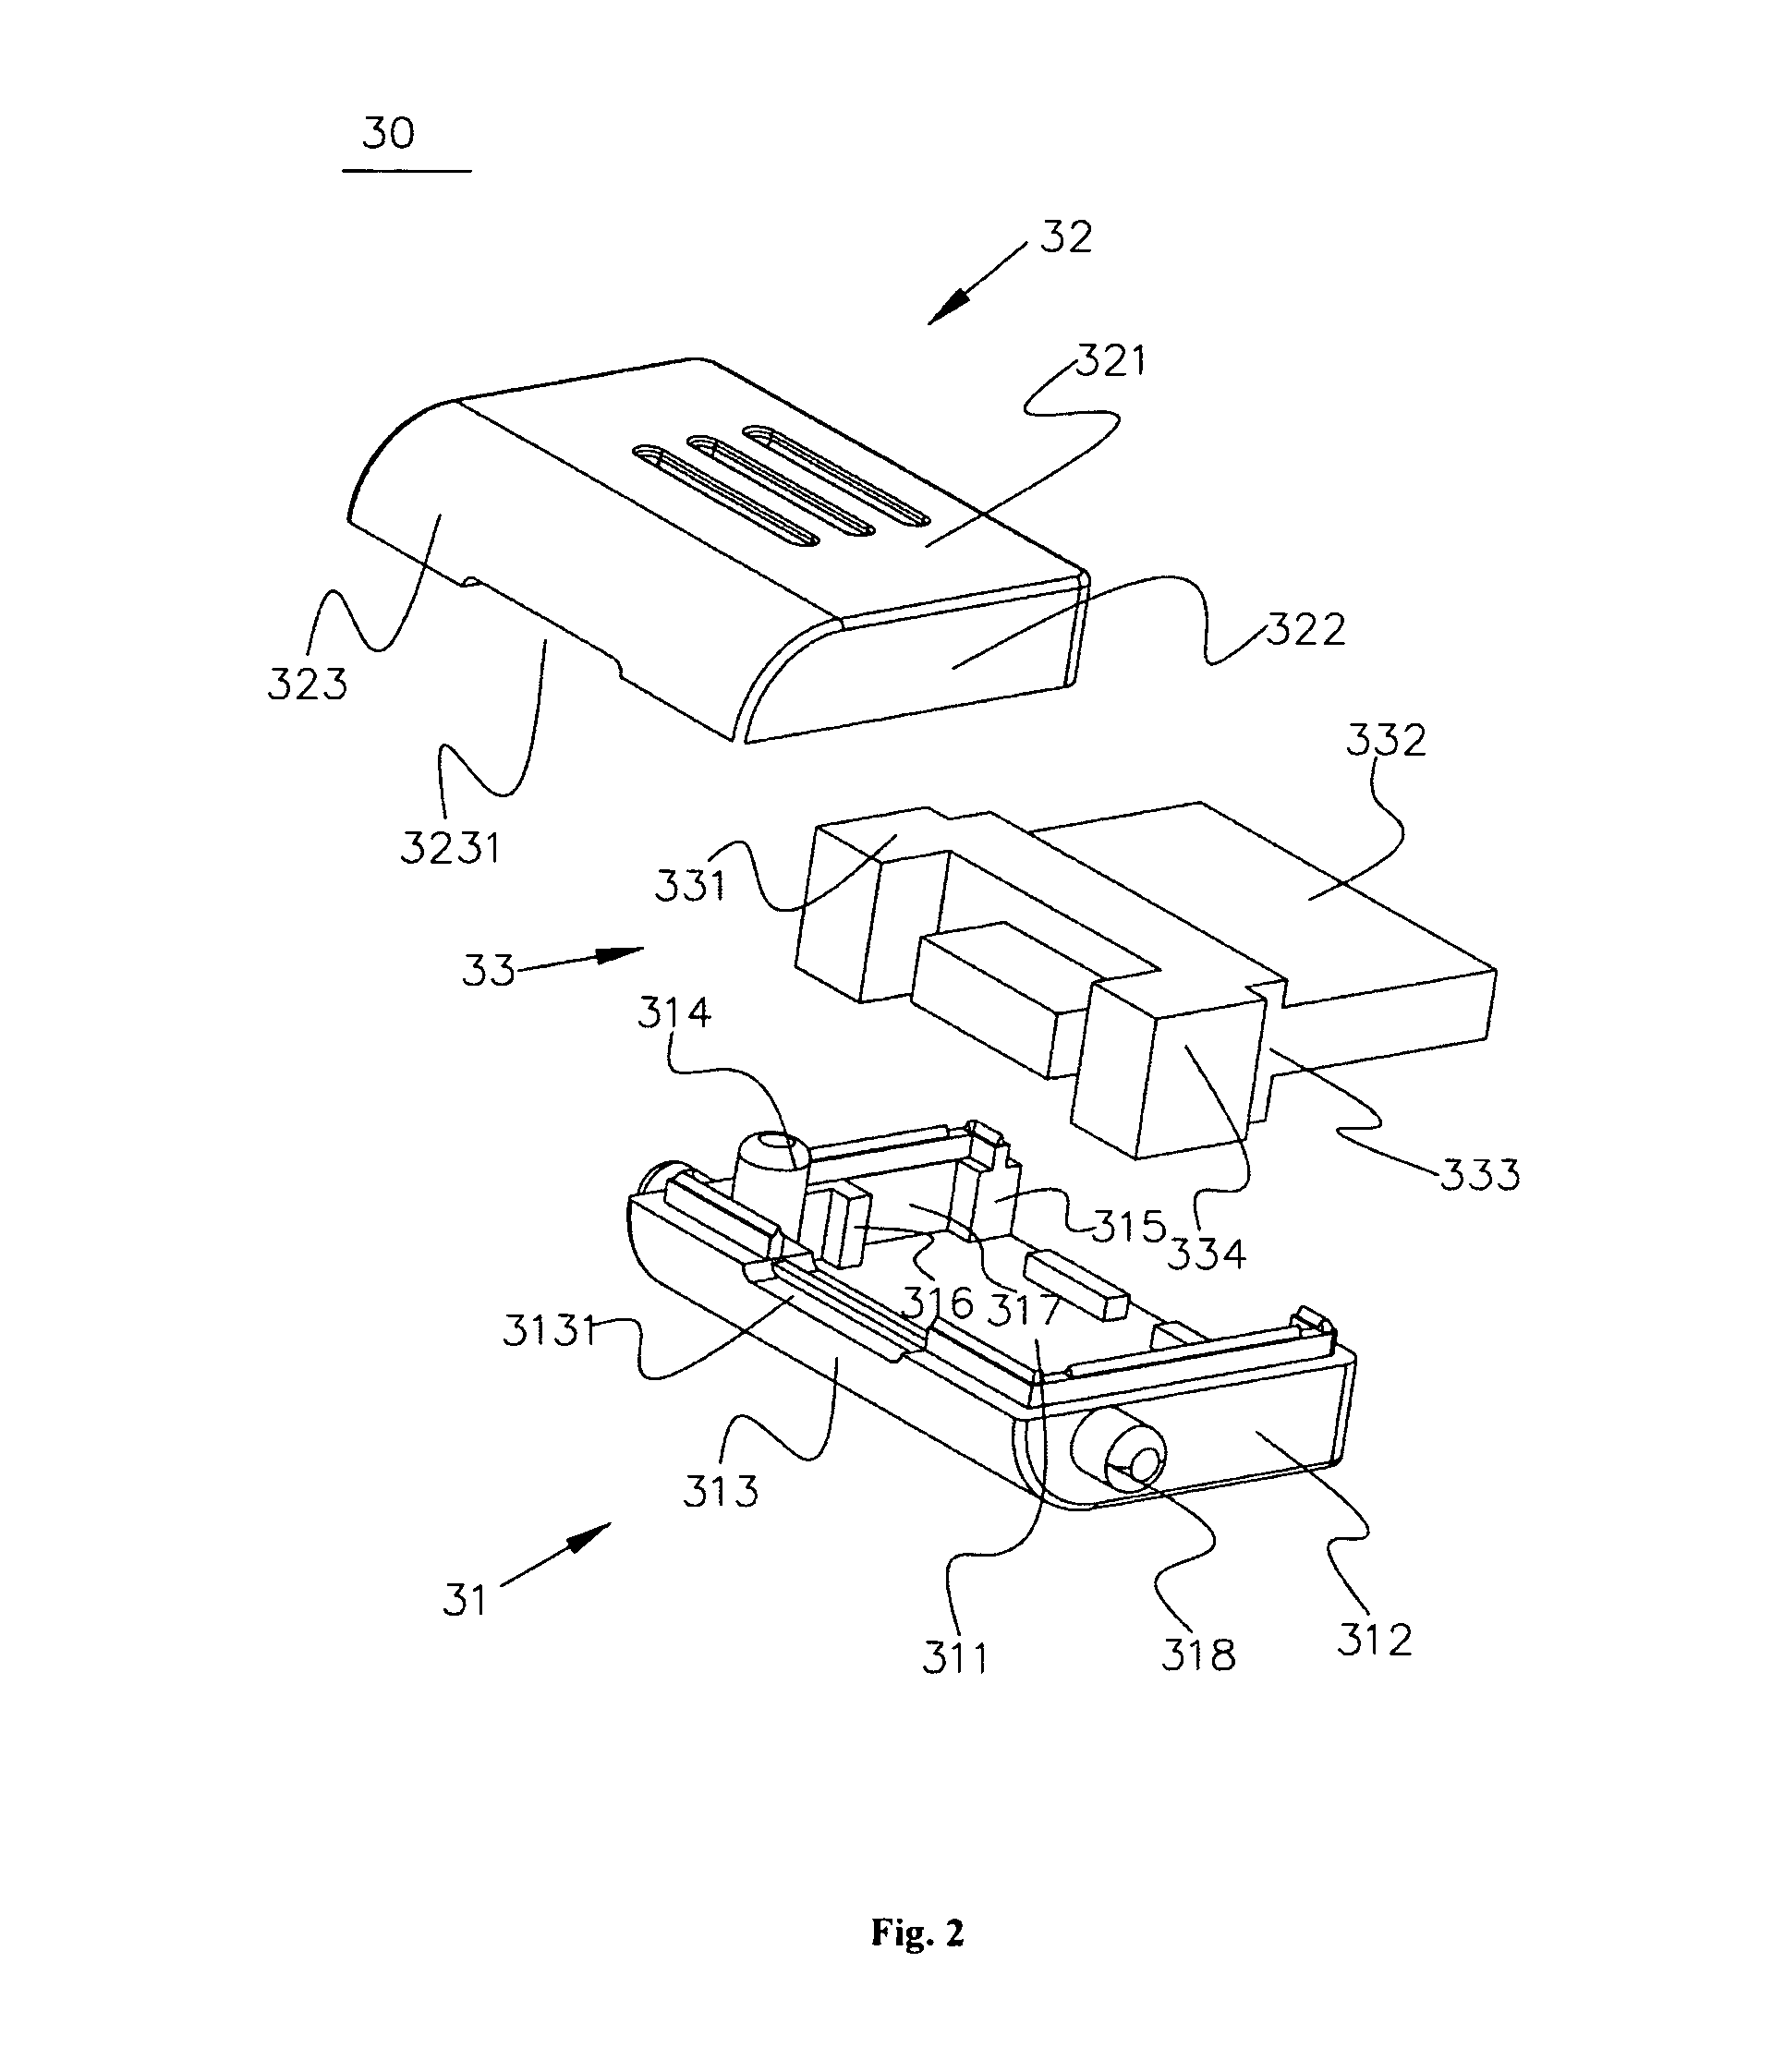 Strap with charging and data transmitting function